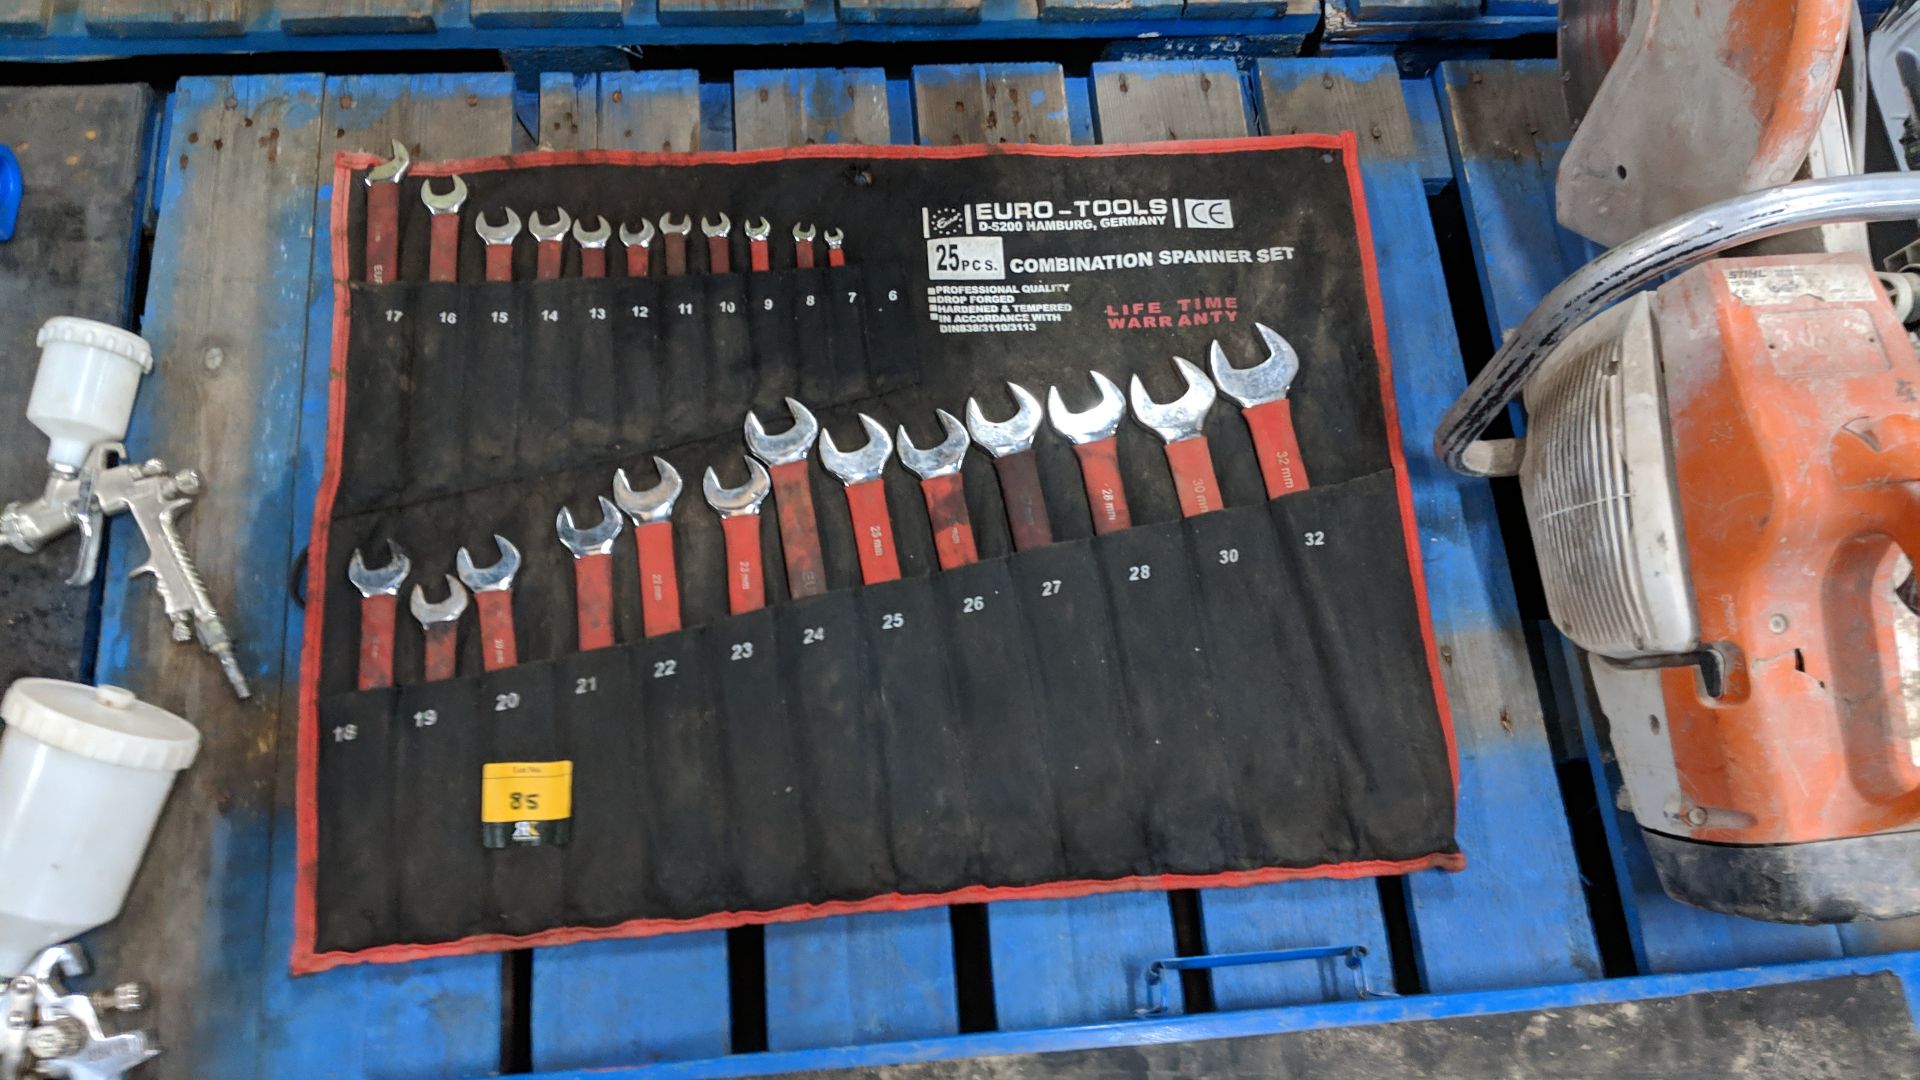 Euro-Tools 25 piece combination spanner set in roll up case - 1 spanner missing IMPORTANT: Please - Image 2 of 5